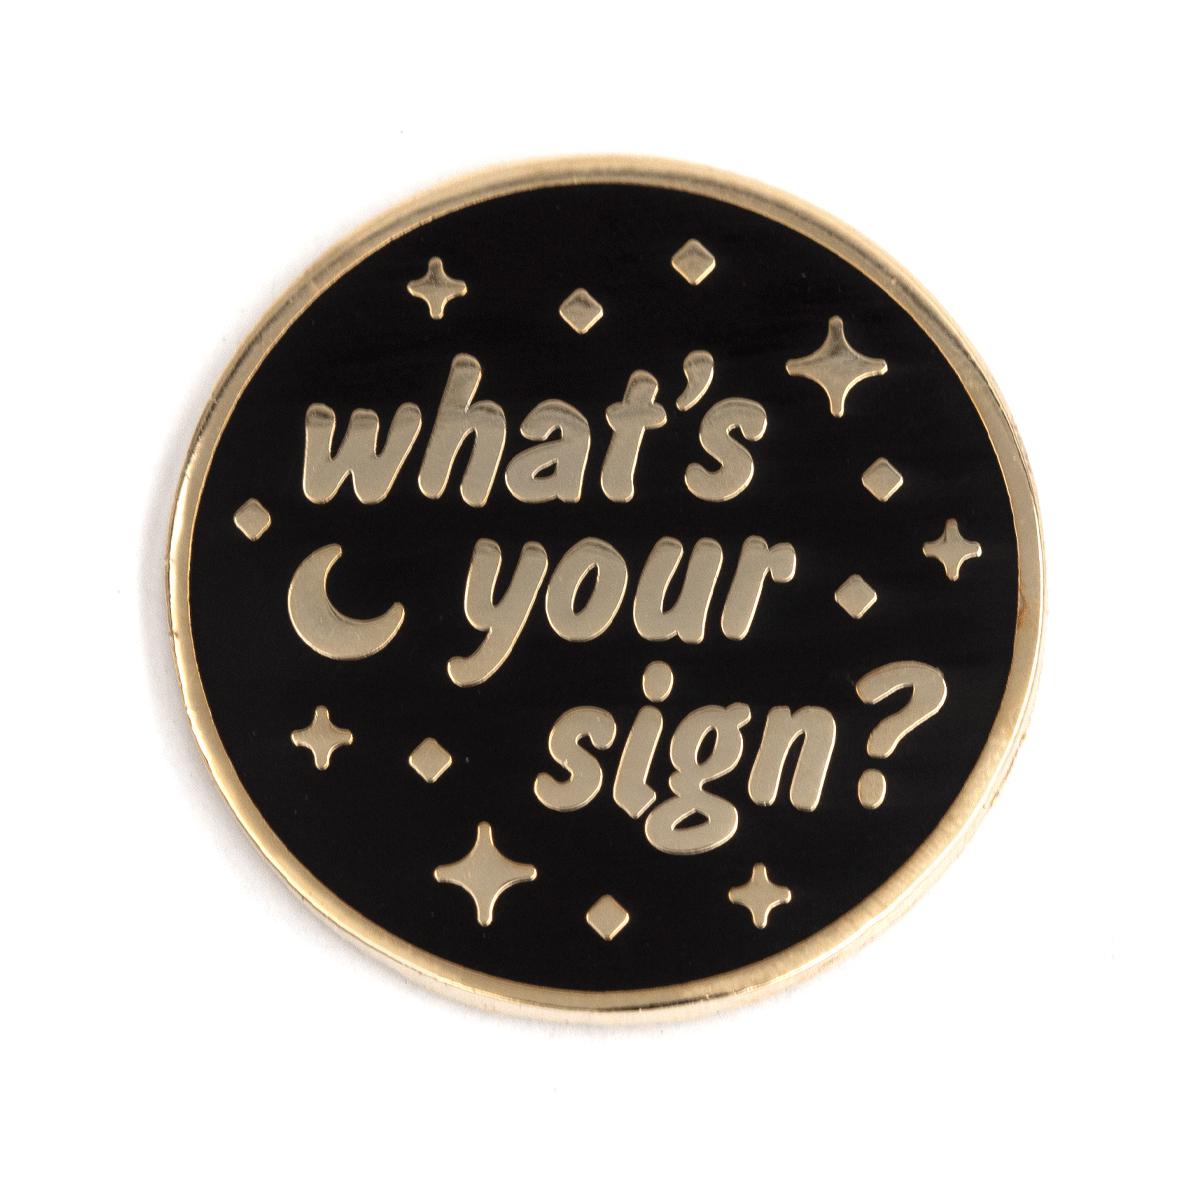 These Are Things-What’s Your Sign Enamel Pin-accessory-gather here online